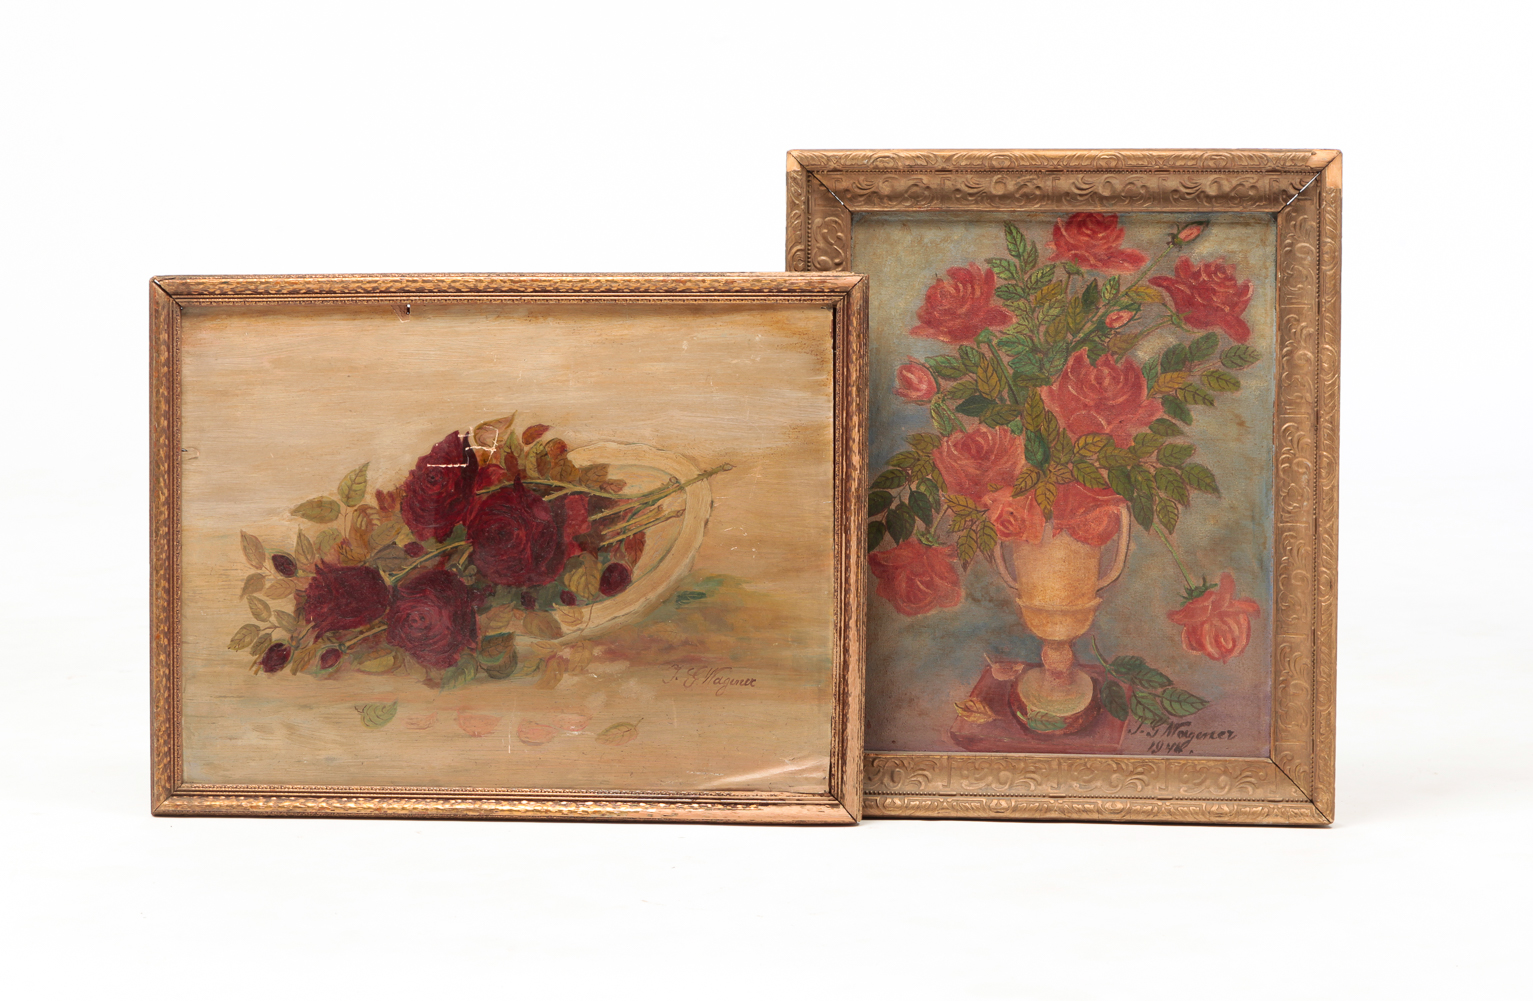 TWO FLORAL STILL LIFES BY FREDERICK